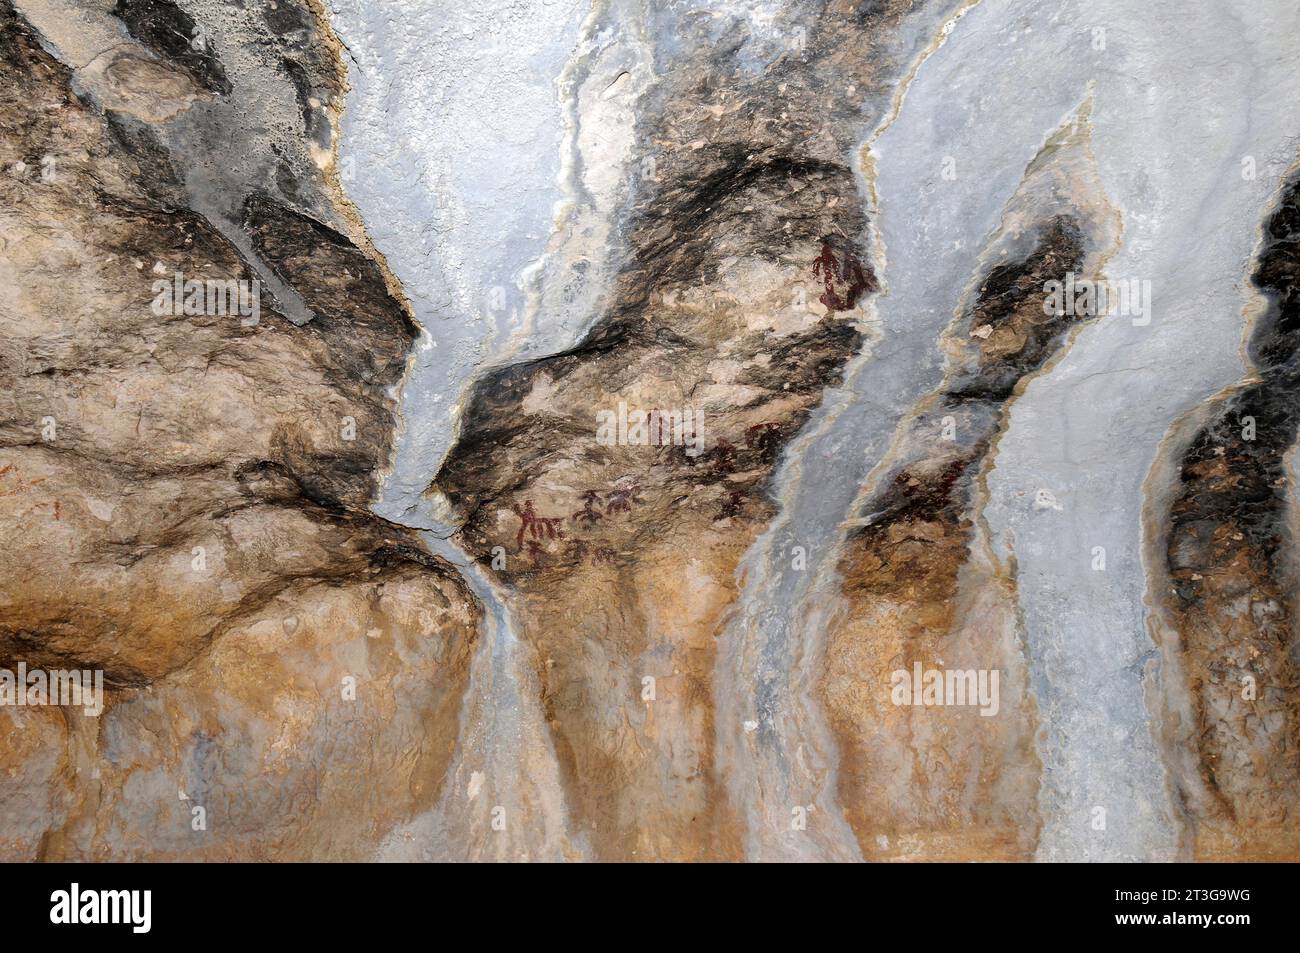 Tozal de Mallata, cave paintings. The precipitation of calcium carbonate is destroying the paintings. Asque, Colungo municipality, Sierra y Cañones de Stock Photo